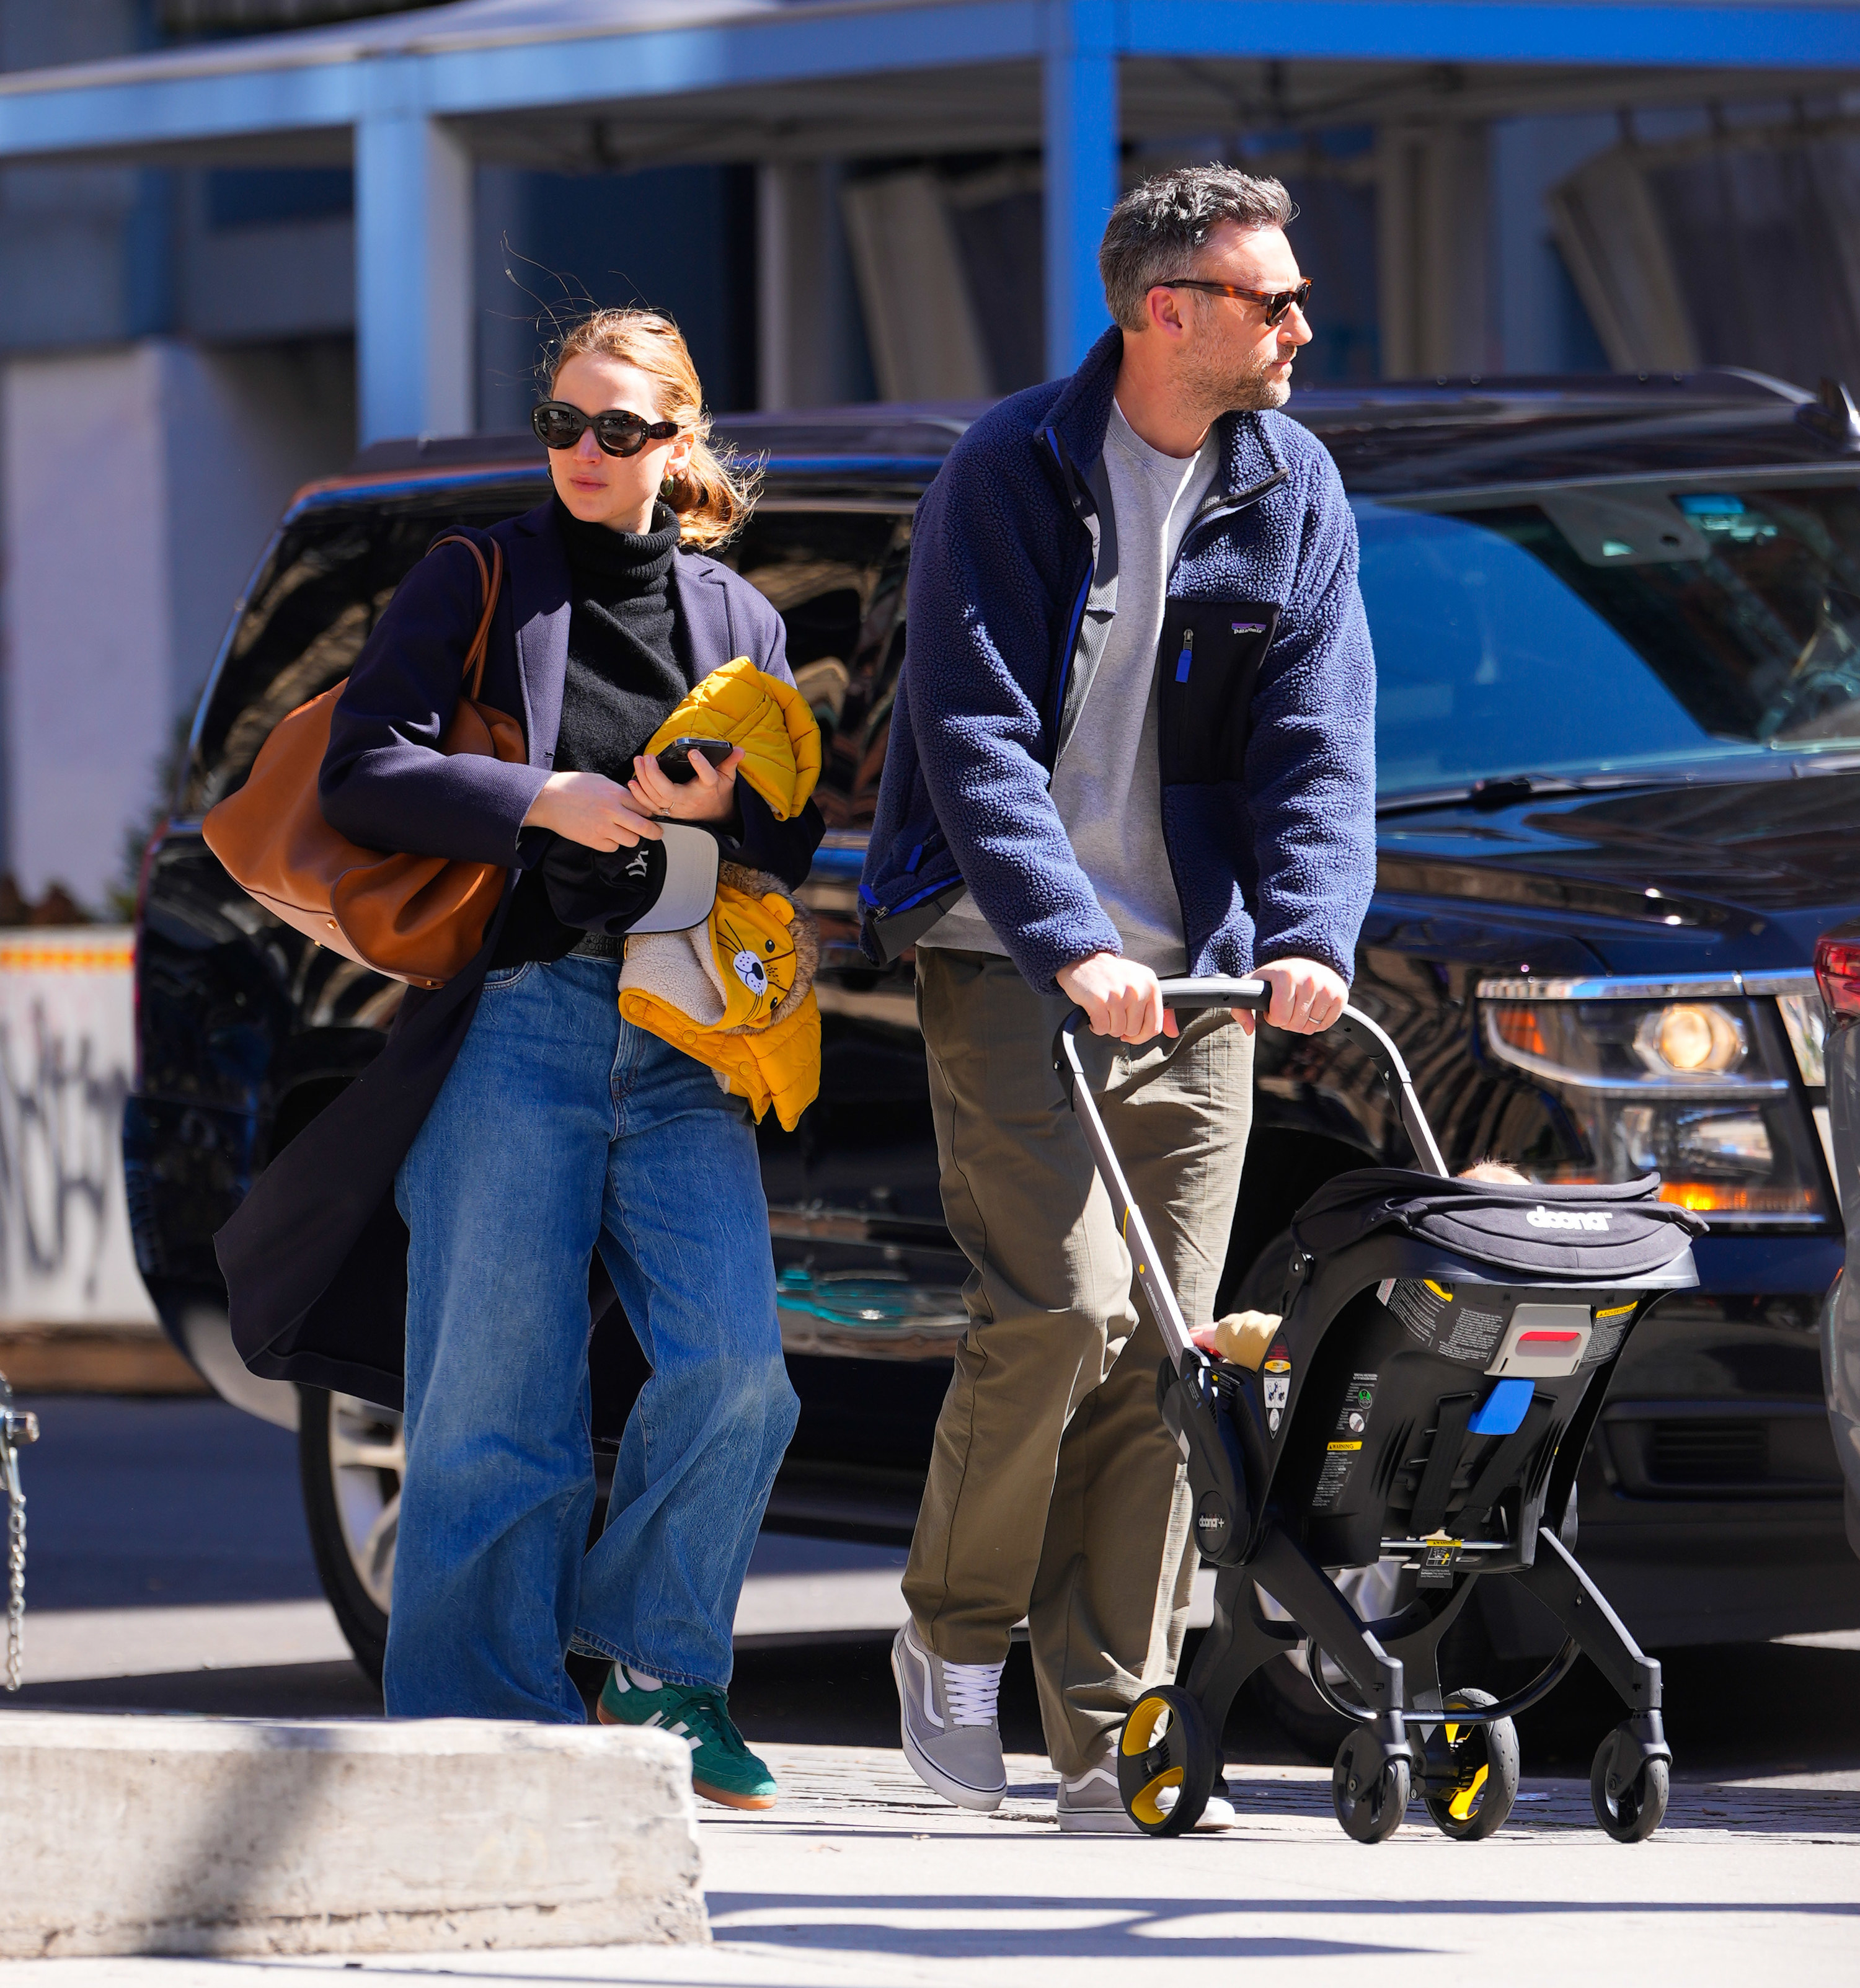 JLaw dressed casually and walking in the street with her husband, Cooke Maroney, who&#x27;s pushing a stroller